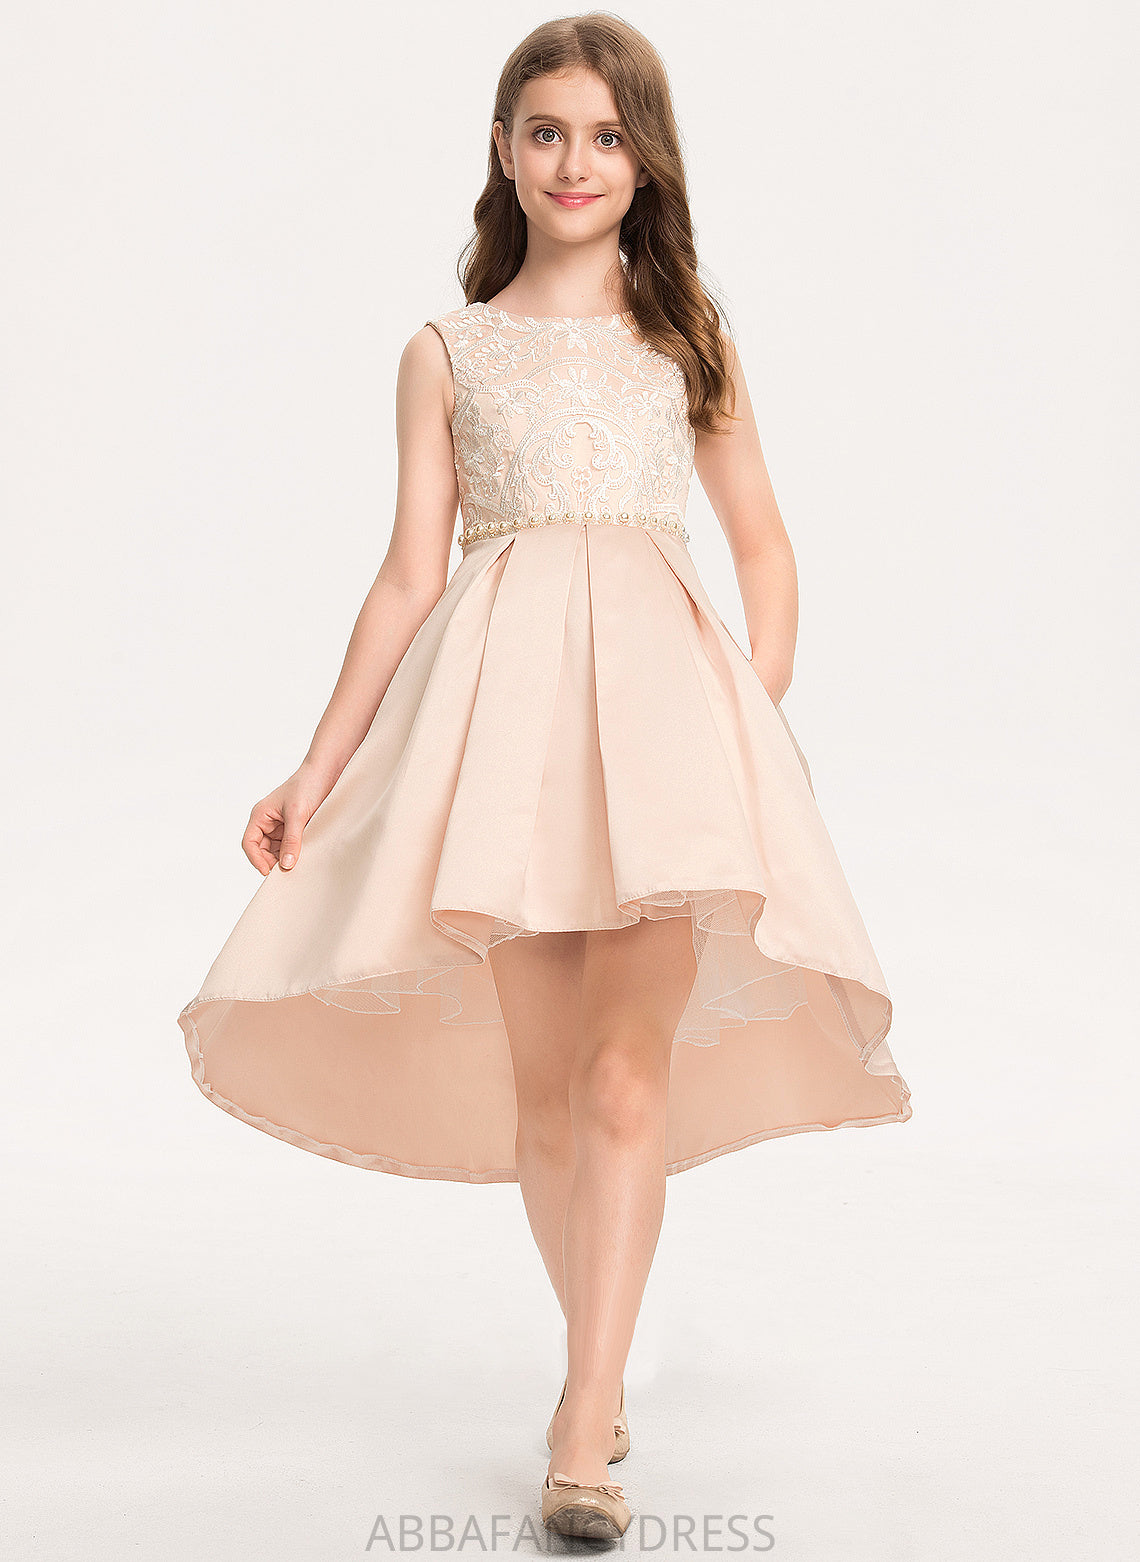 Scoop Asymmetrical Pockets Junior Bridesmaid Dresses A-Line Lace With Angel Beading Satin Neck